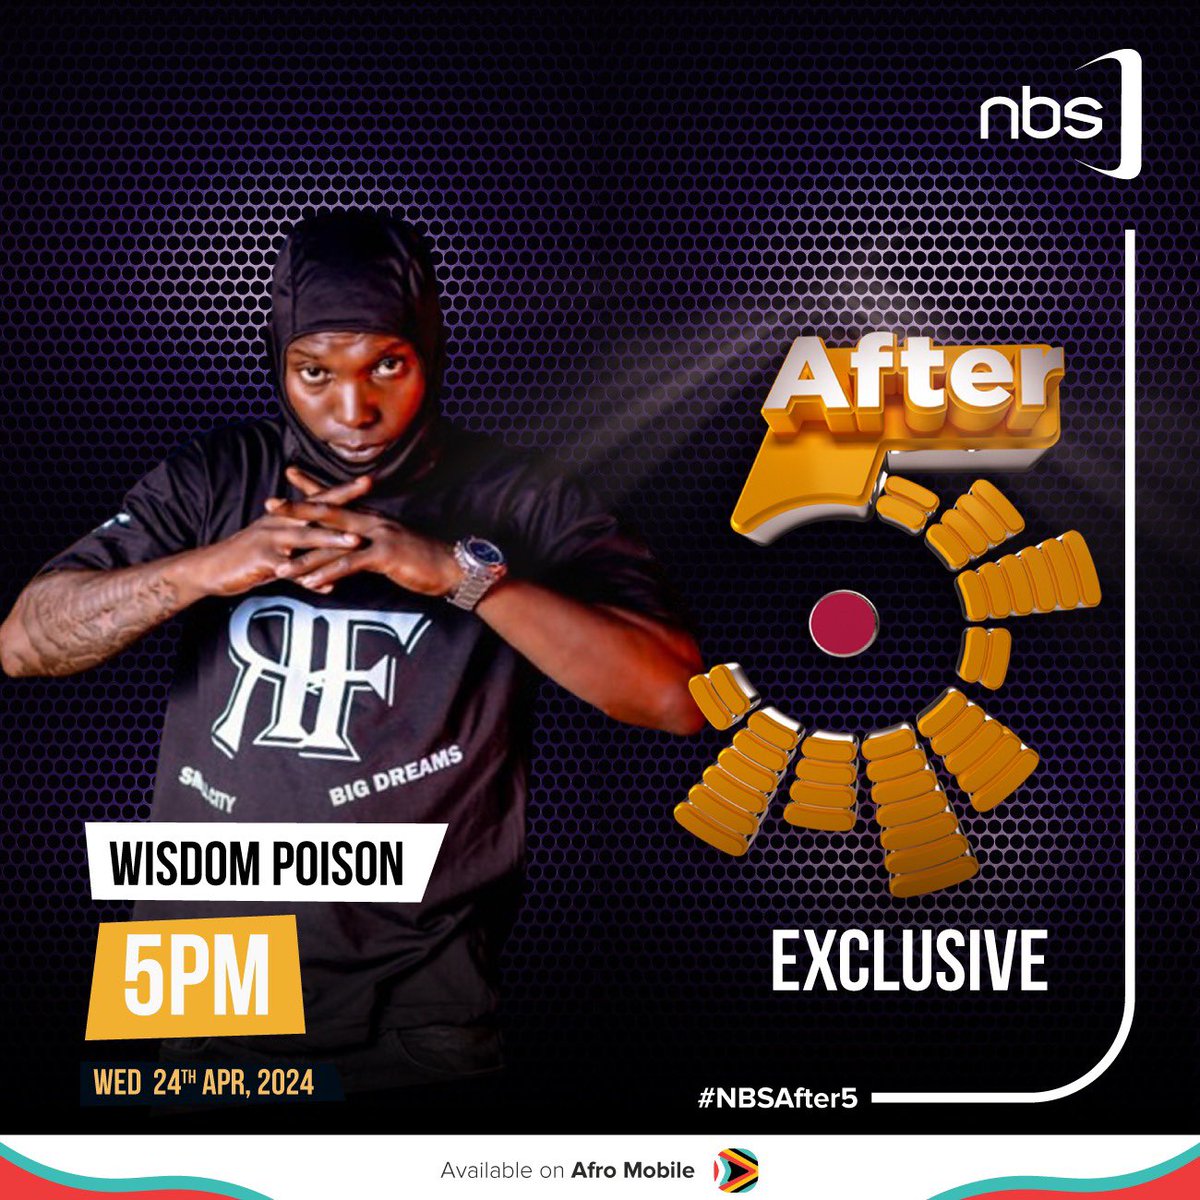 Don’t miss today’s #NBSAfter5 show with the fantastic team featuring rising star, Wisdom Poison. #NBSUpdates